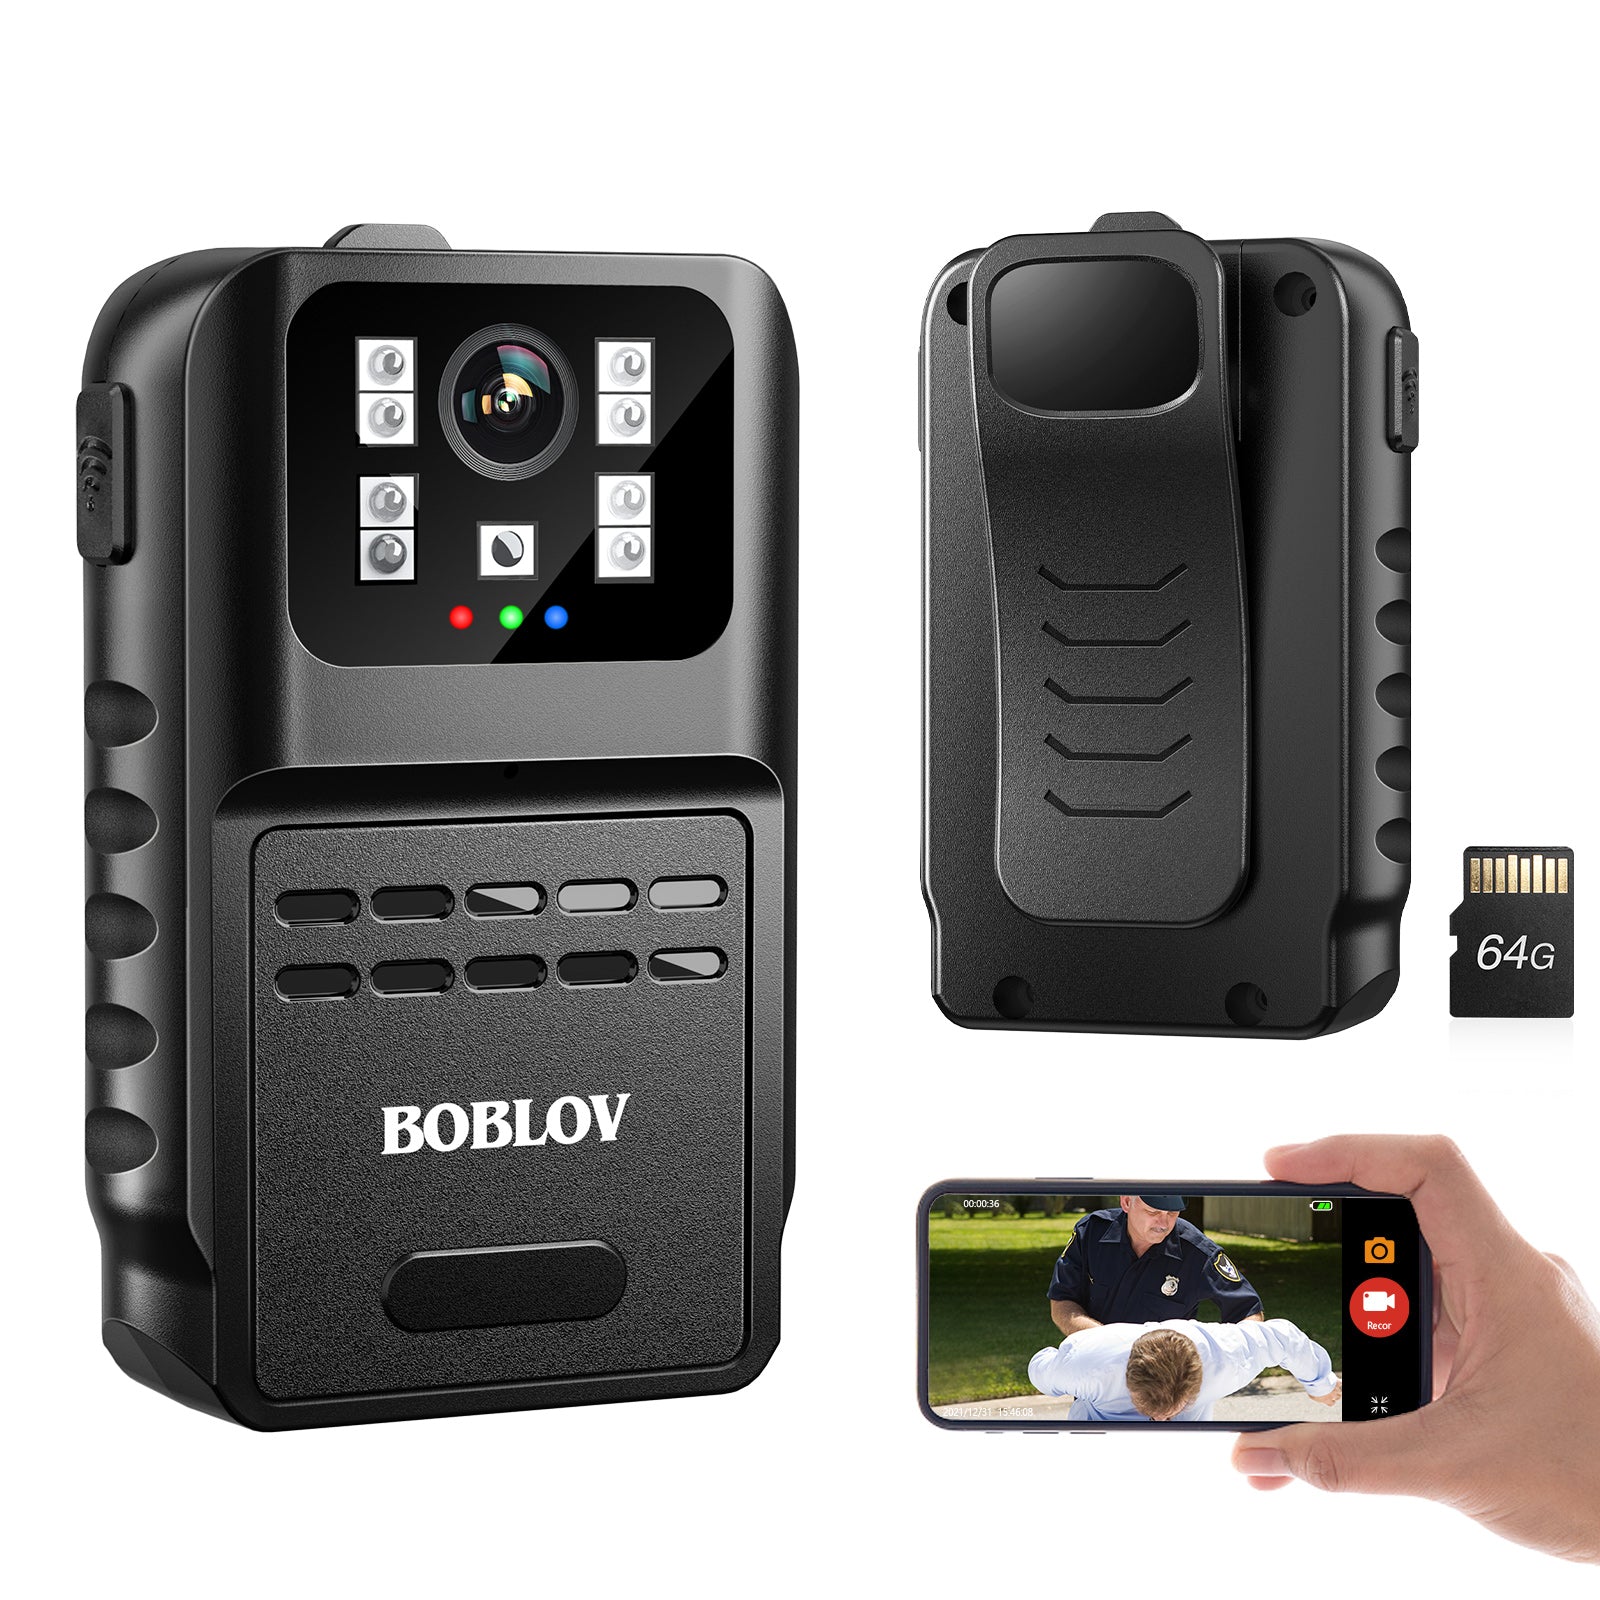 880W small body camera with 1080P resolution and night vision feature8